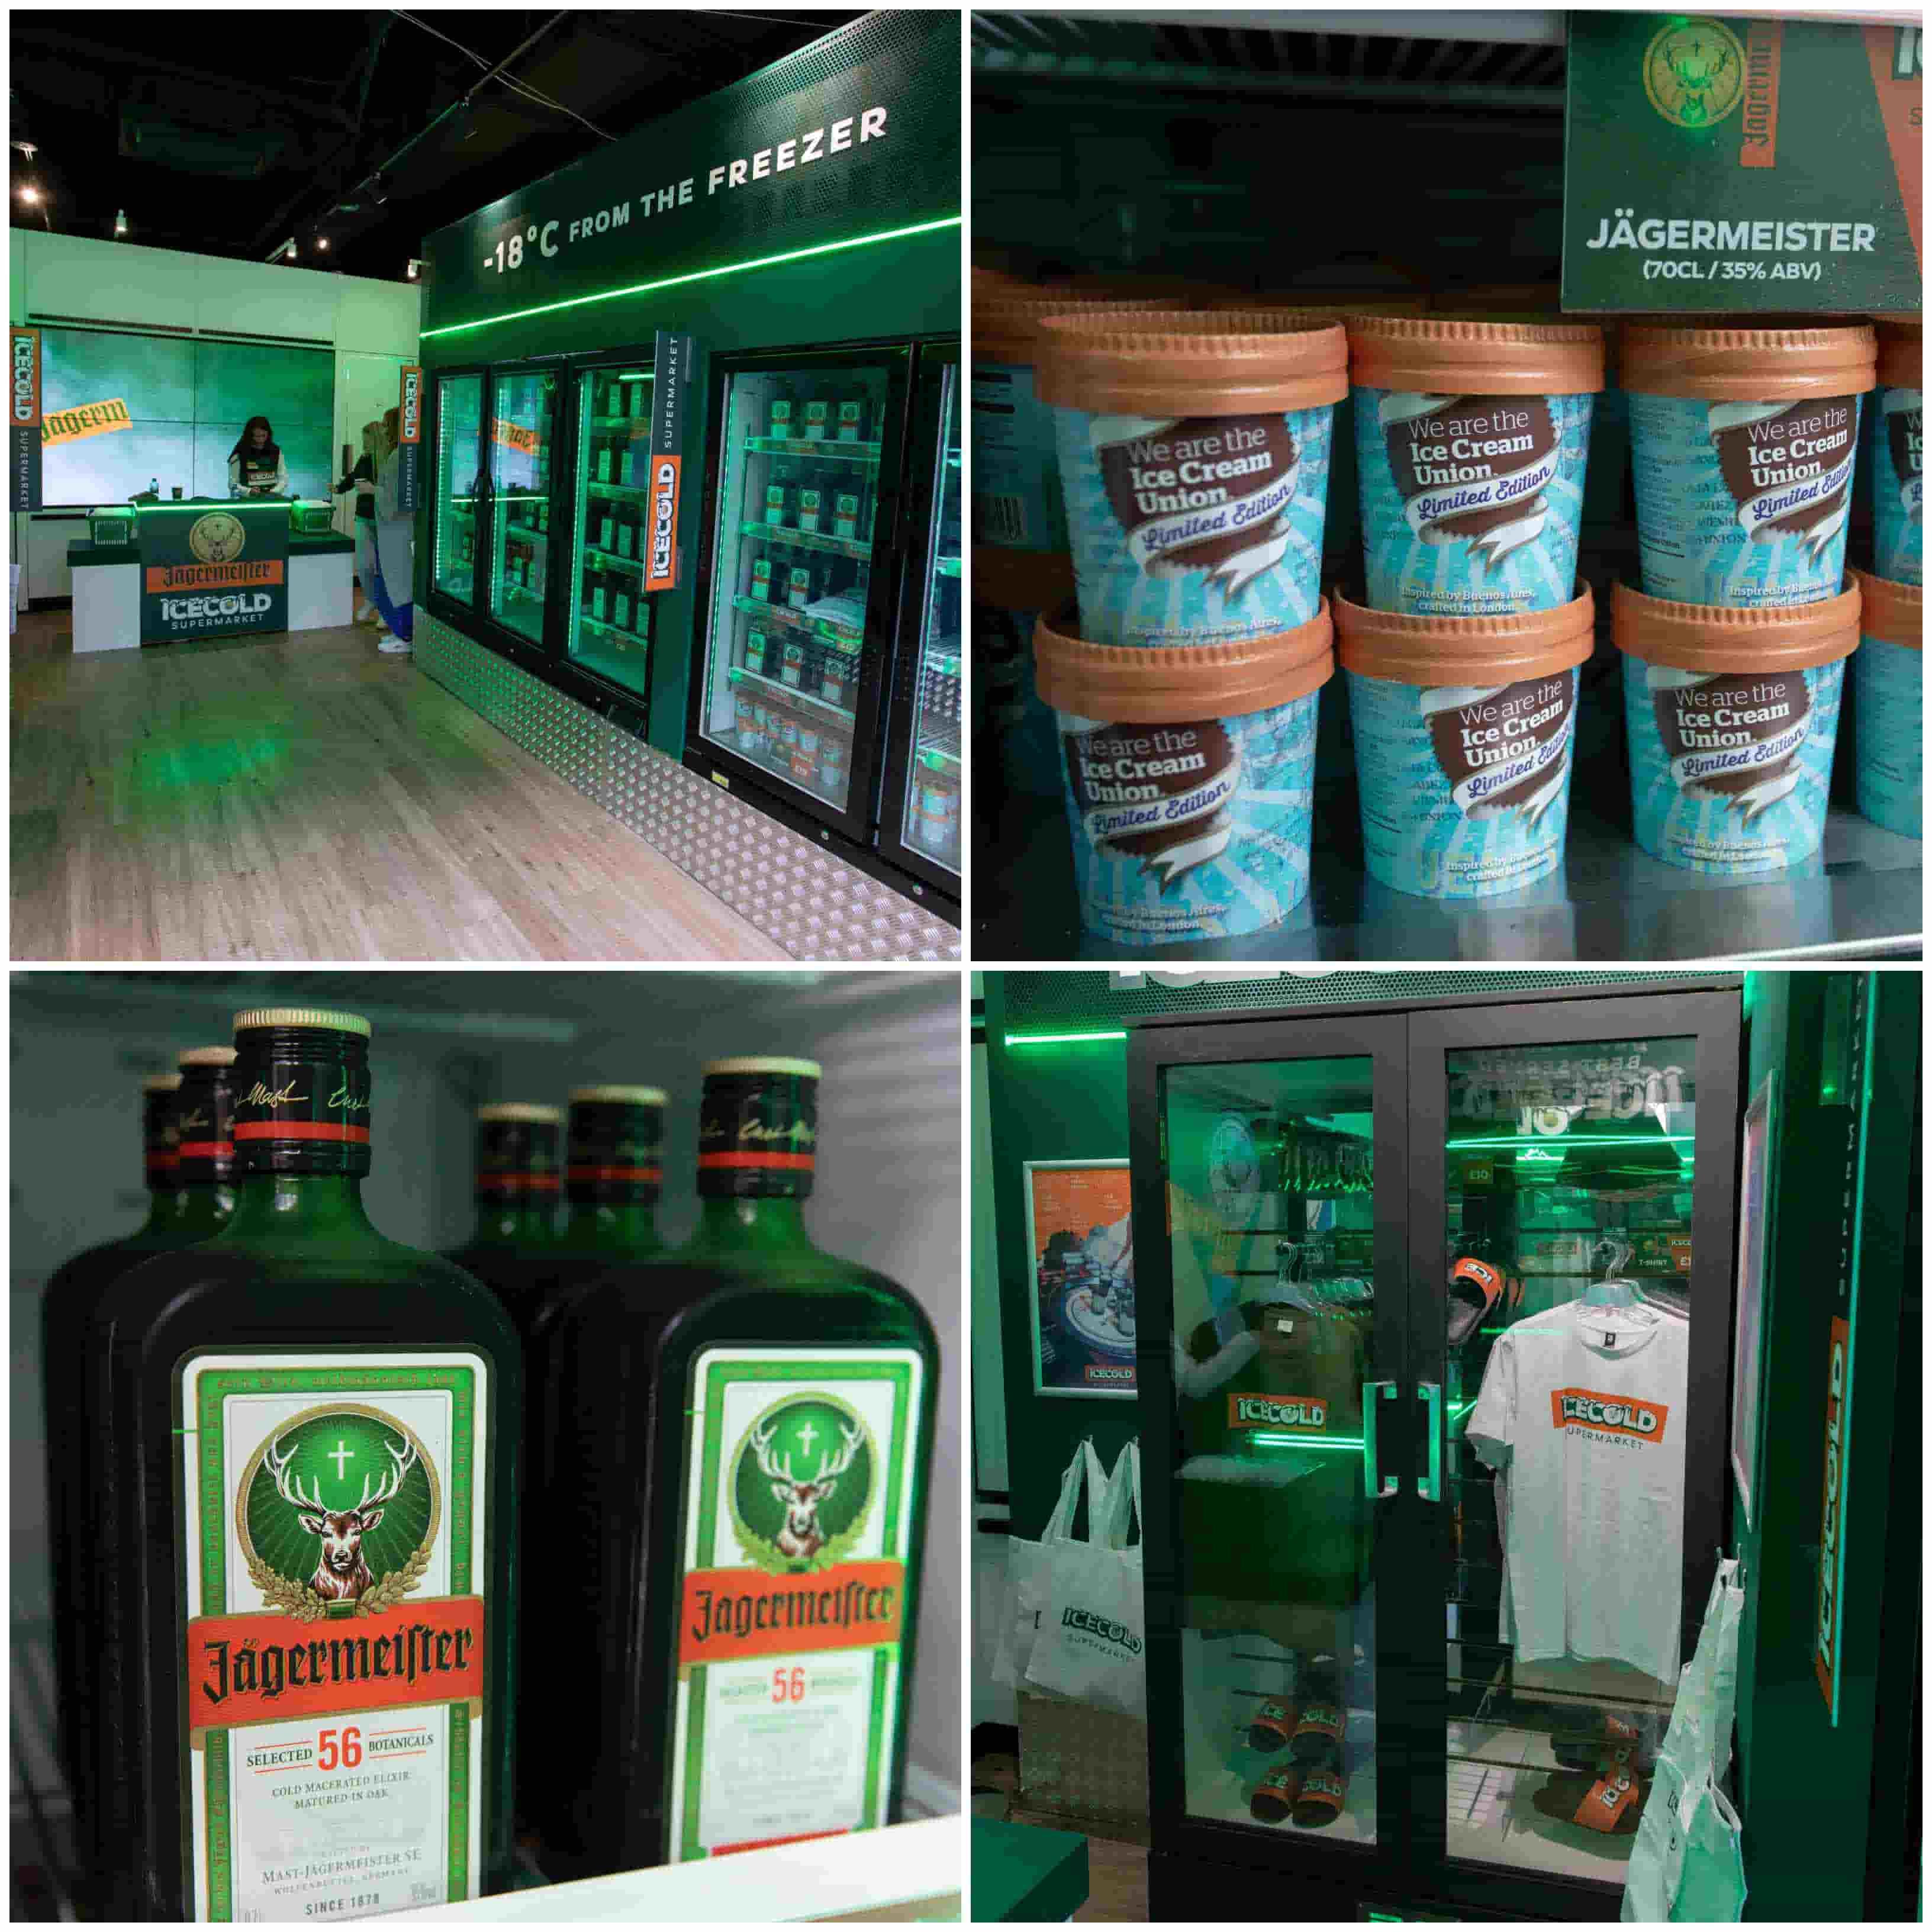 Jagermeister stock on display in Sook's Oxford Street space including Jagermeister ice cream and branded t-shirts